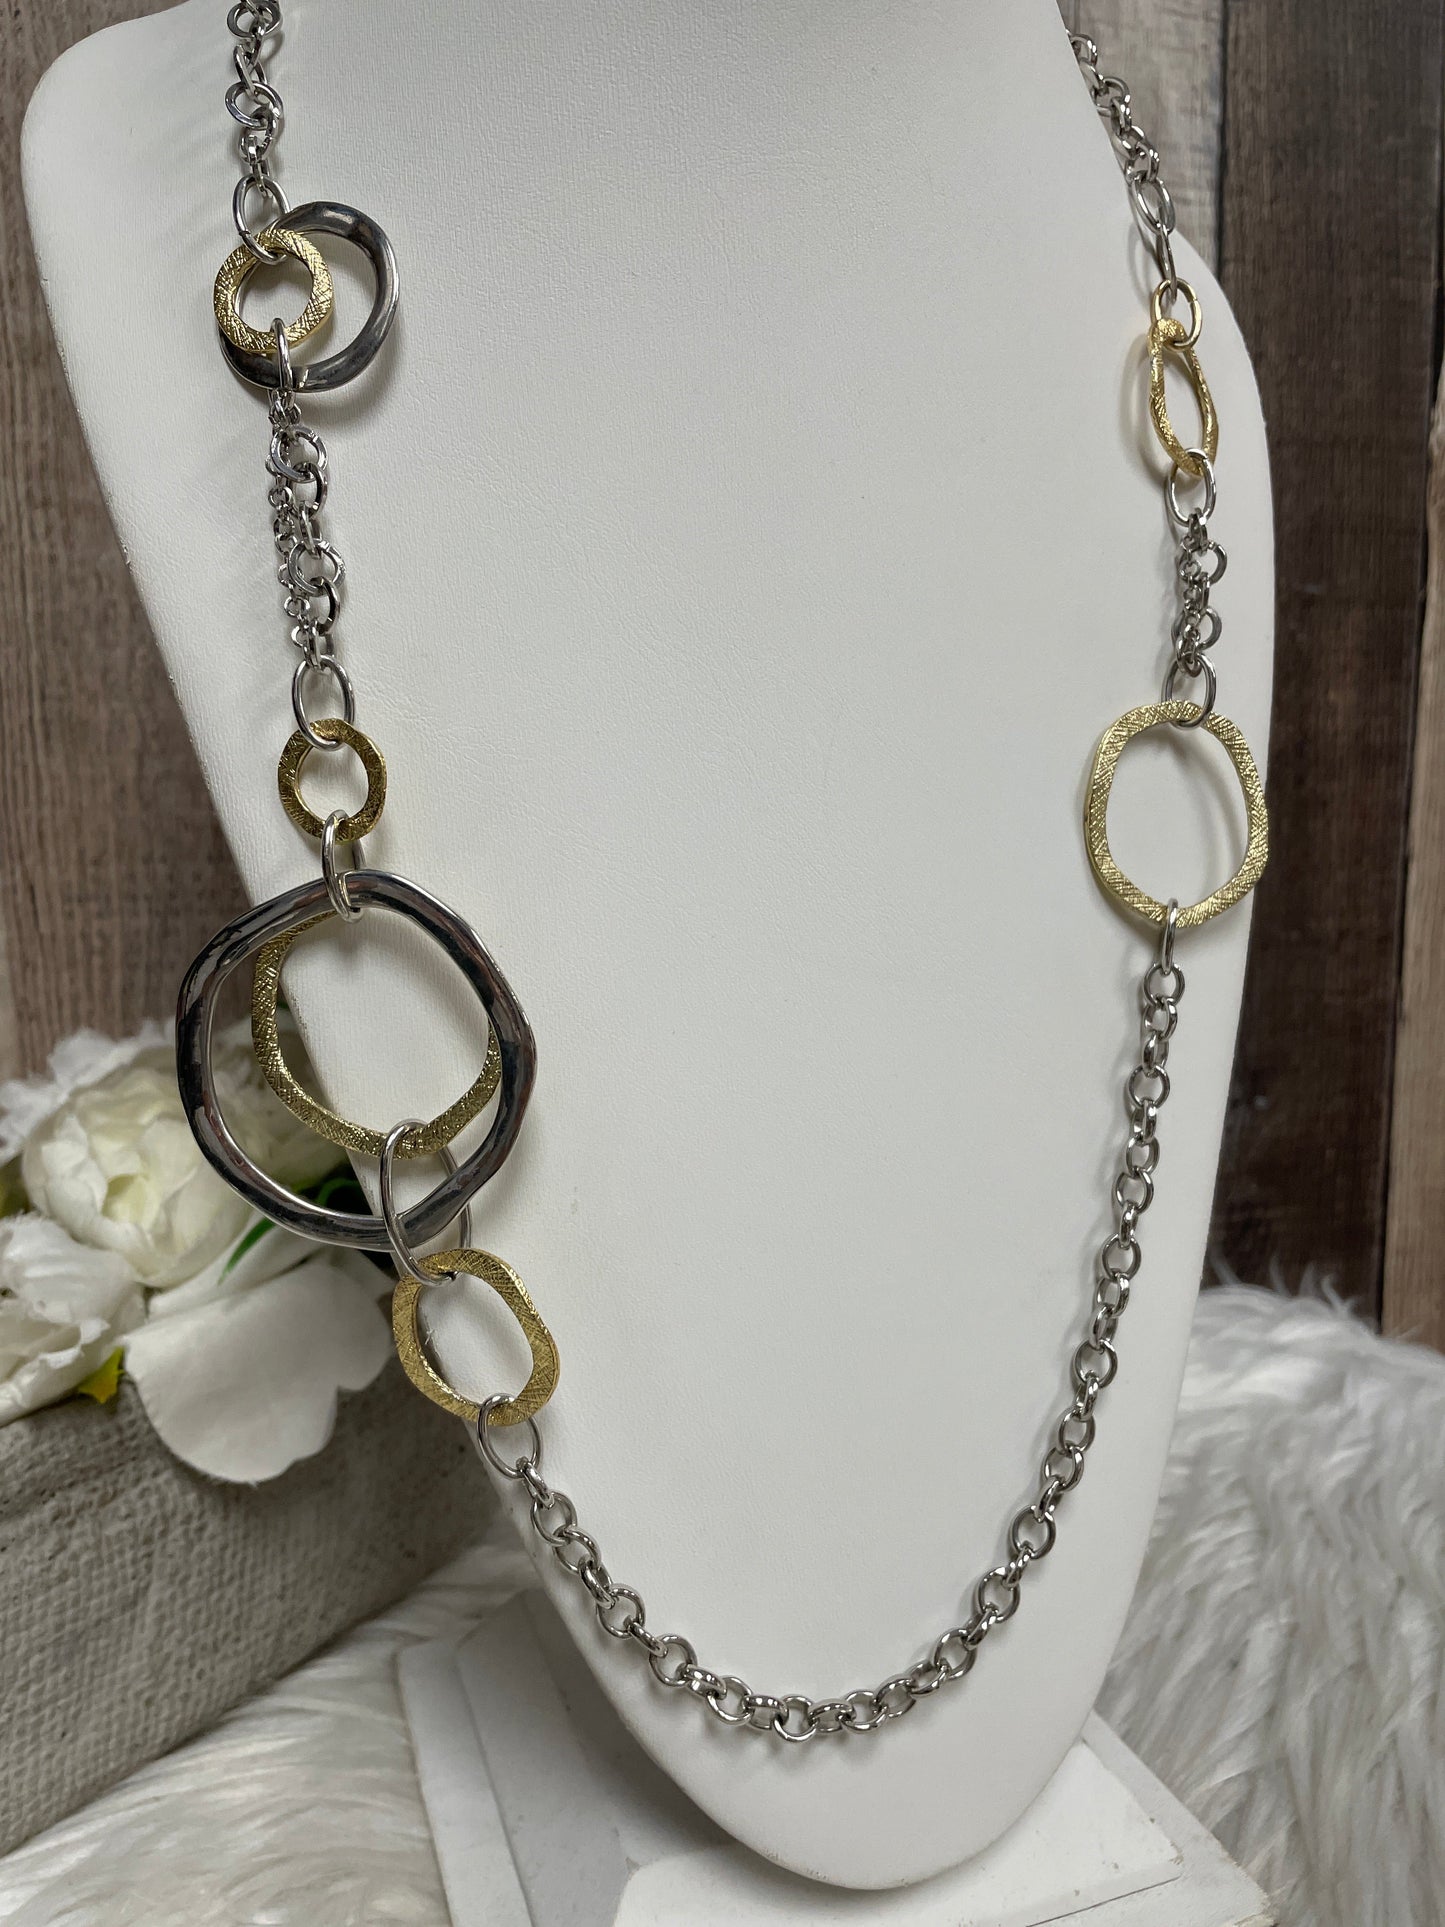 Necklace Layered By Cme